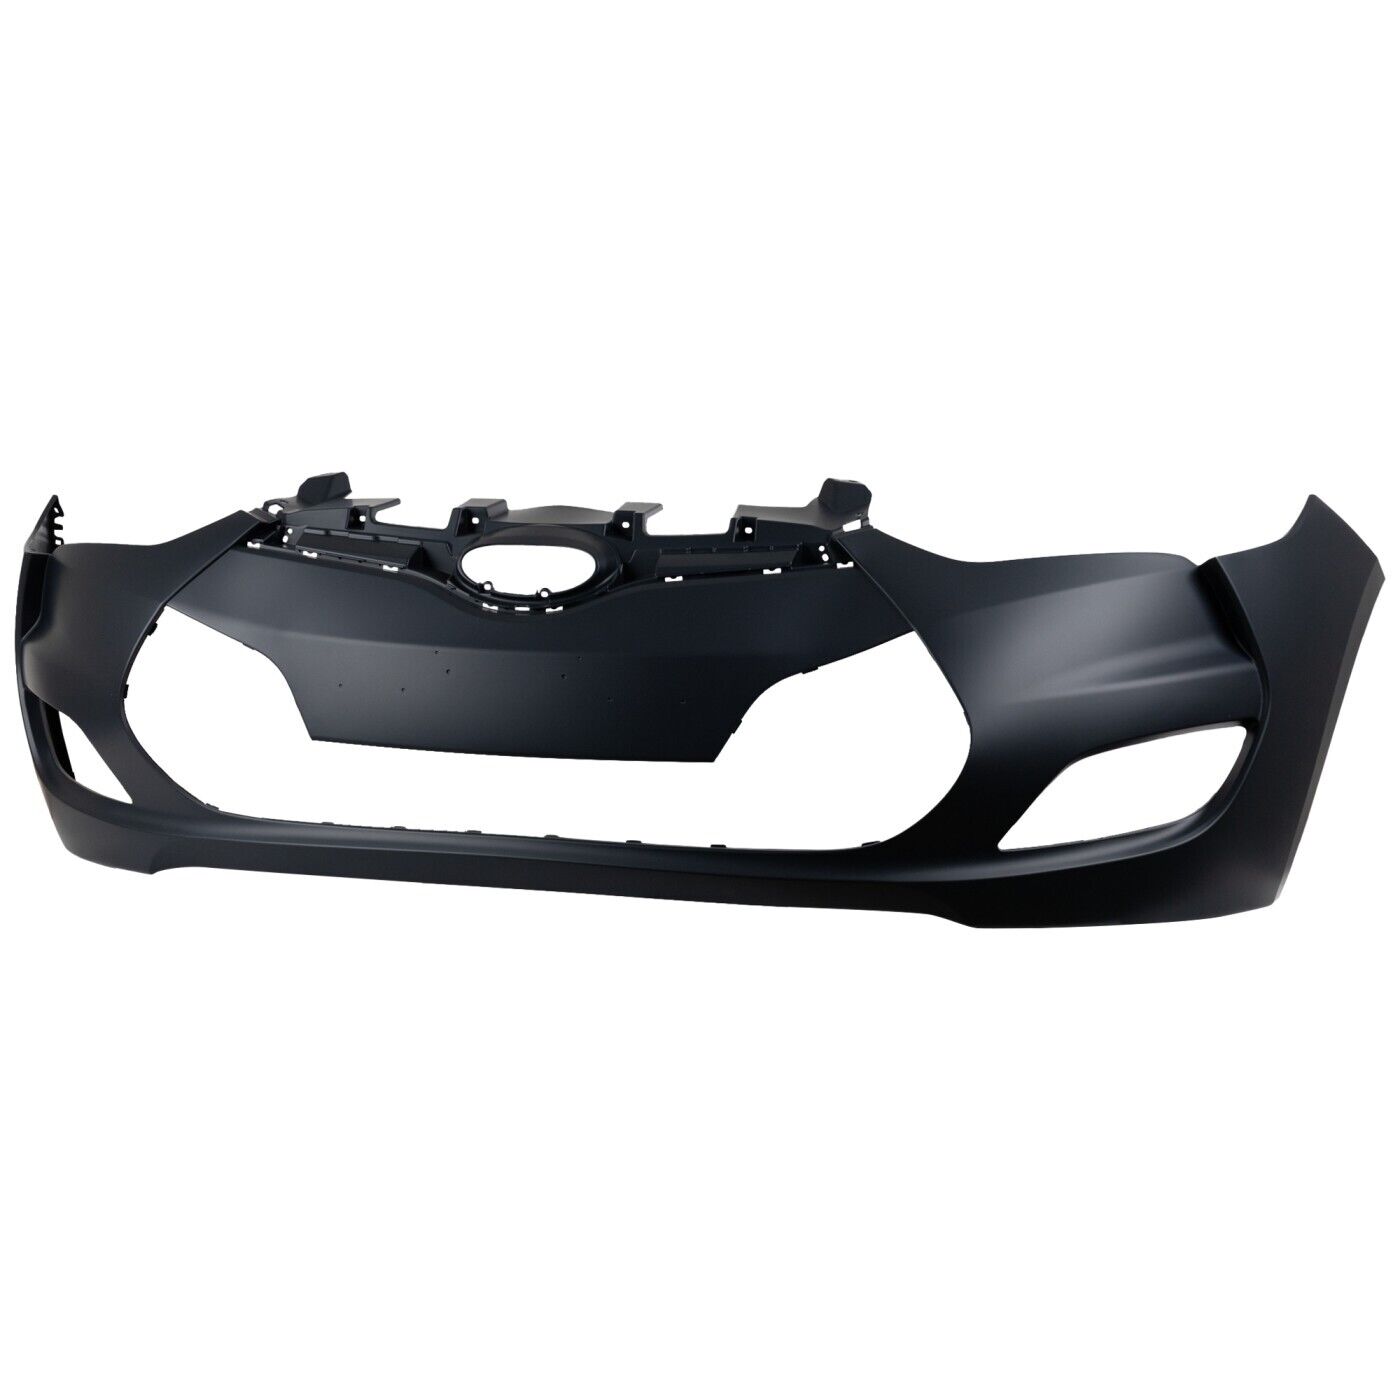 Front Bumper Cover For 2012-2016 Hyundai Veloster w/ fog lamp holes Primed